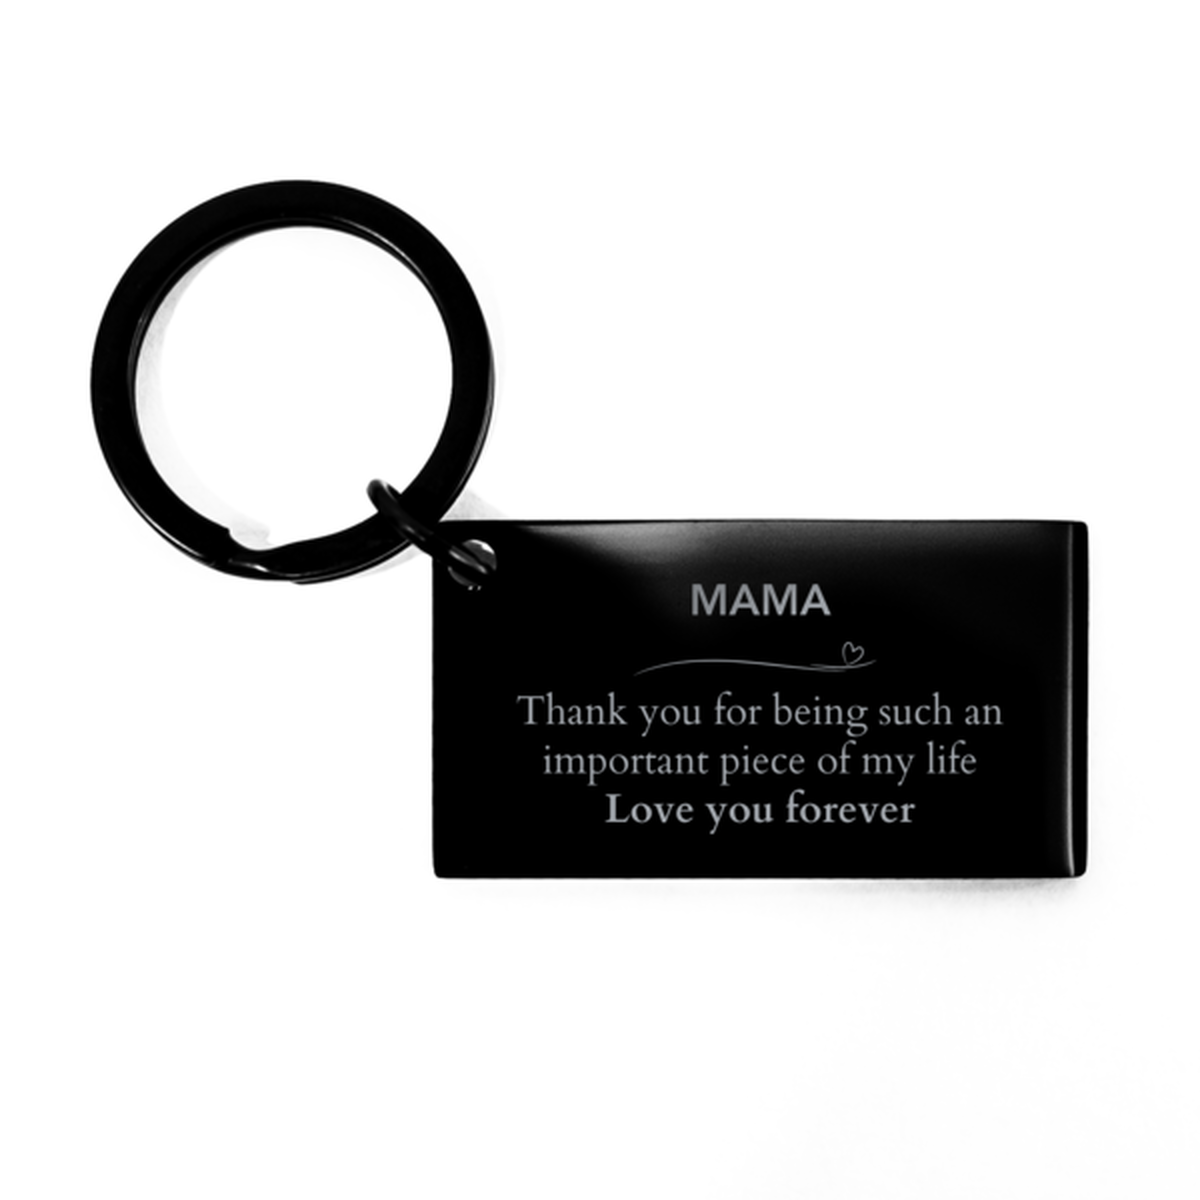 Appropriate Mama Keychain Epic Birthday Gifts for Mama Thank you for being such an important piece of my life Mama Christmas Mothers Fathers Day